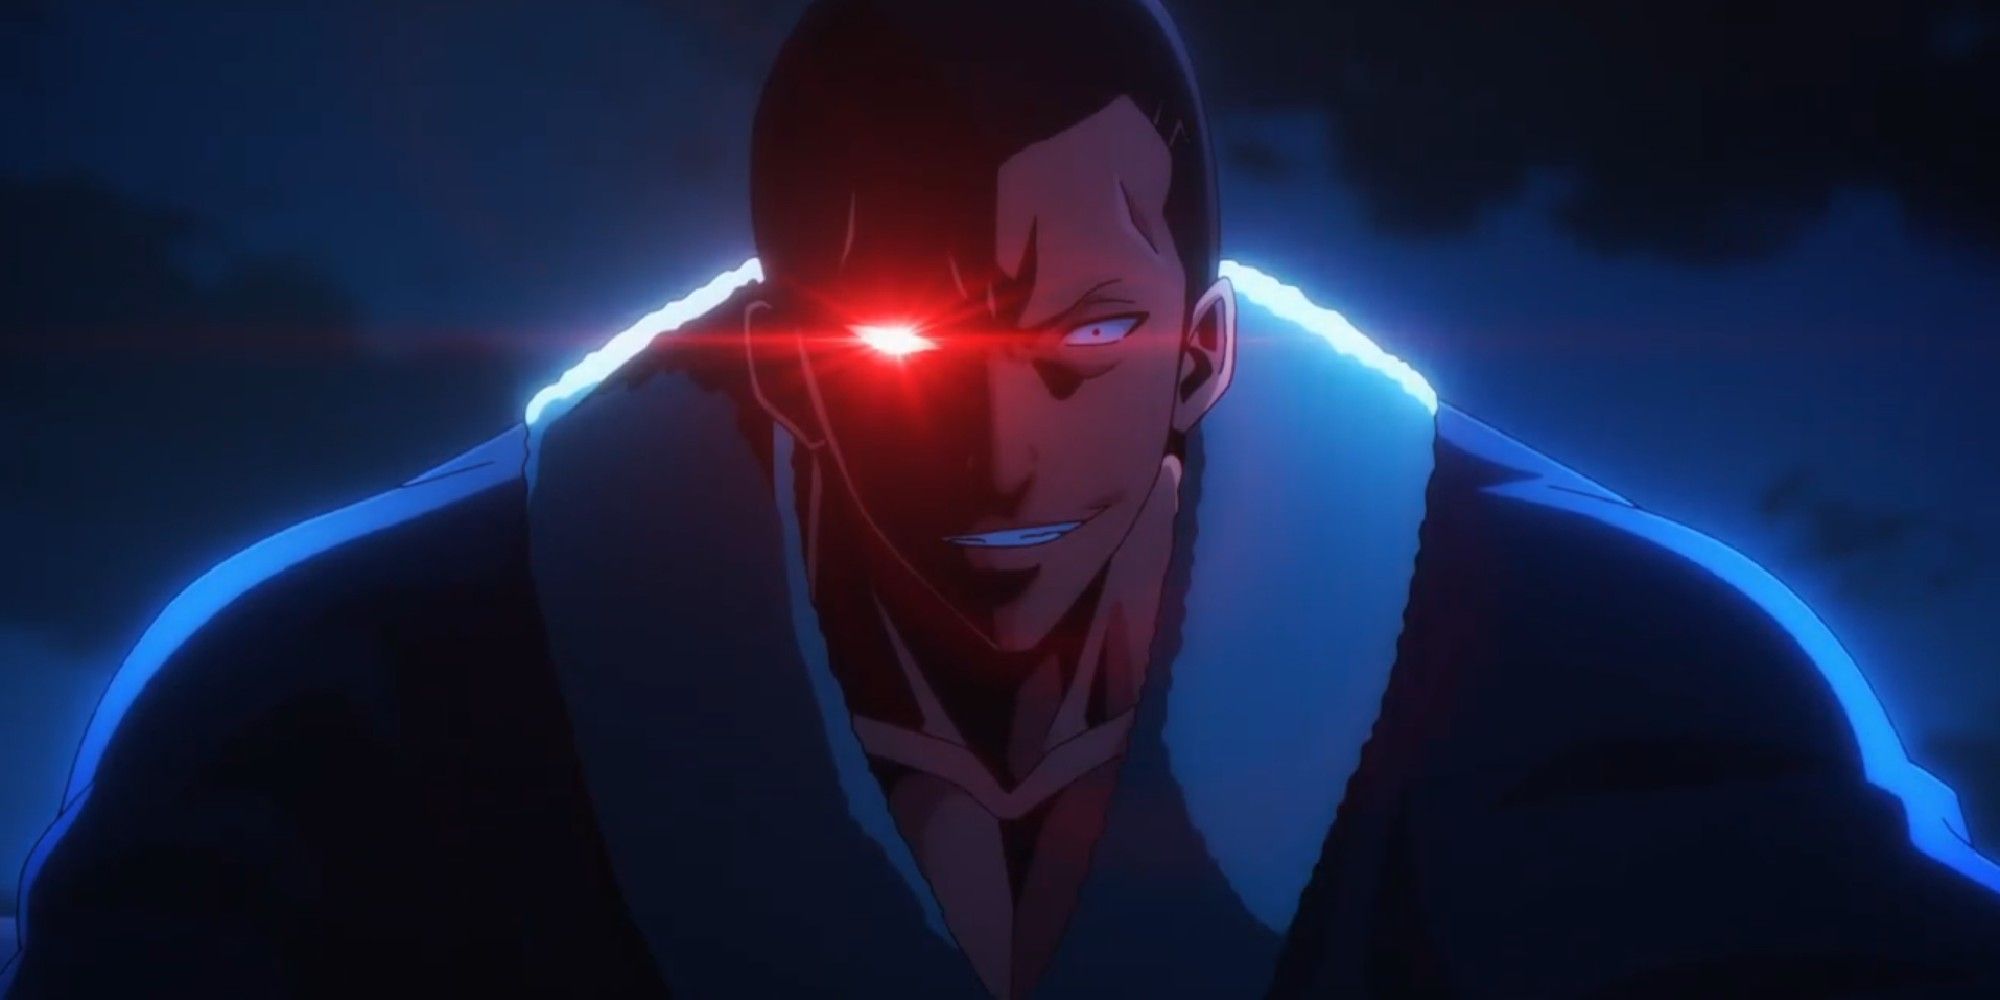 Hwang Dongsoo with one of his eyes glowing red in the Solo Leveling anime adaptation.